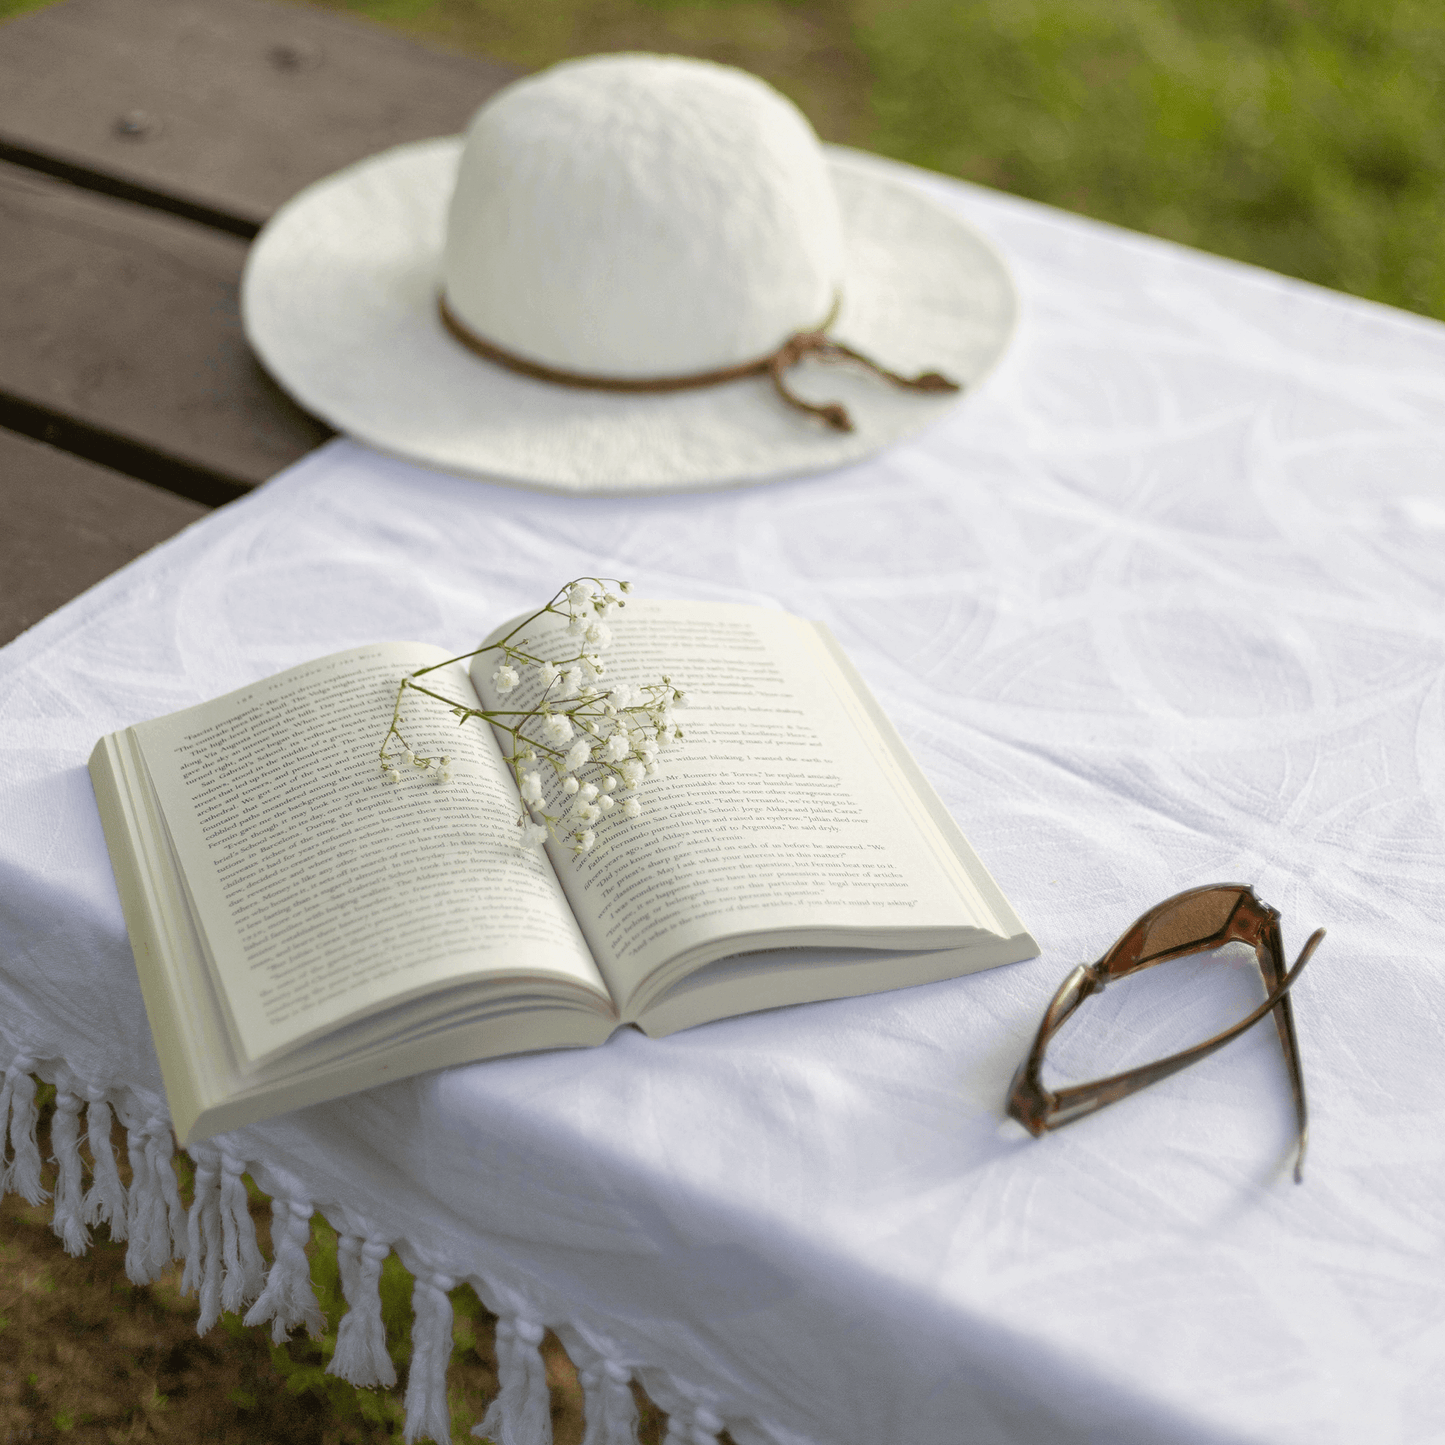 White Turkish towel used as a picnic tablecloth with a book and summer hat